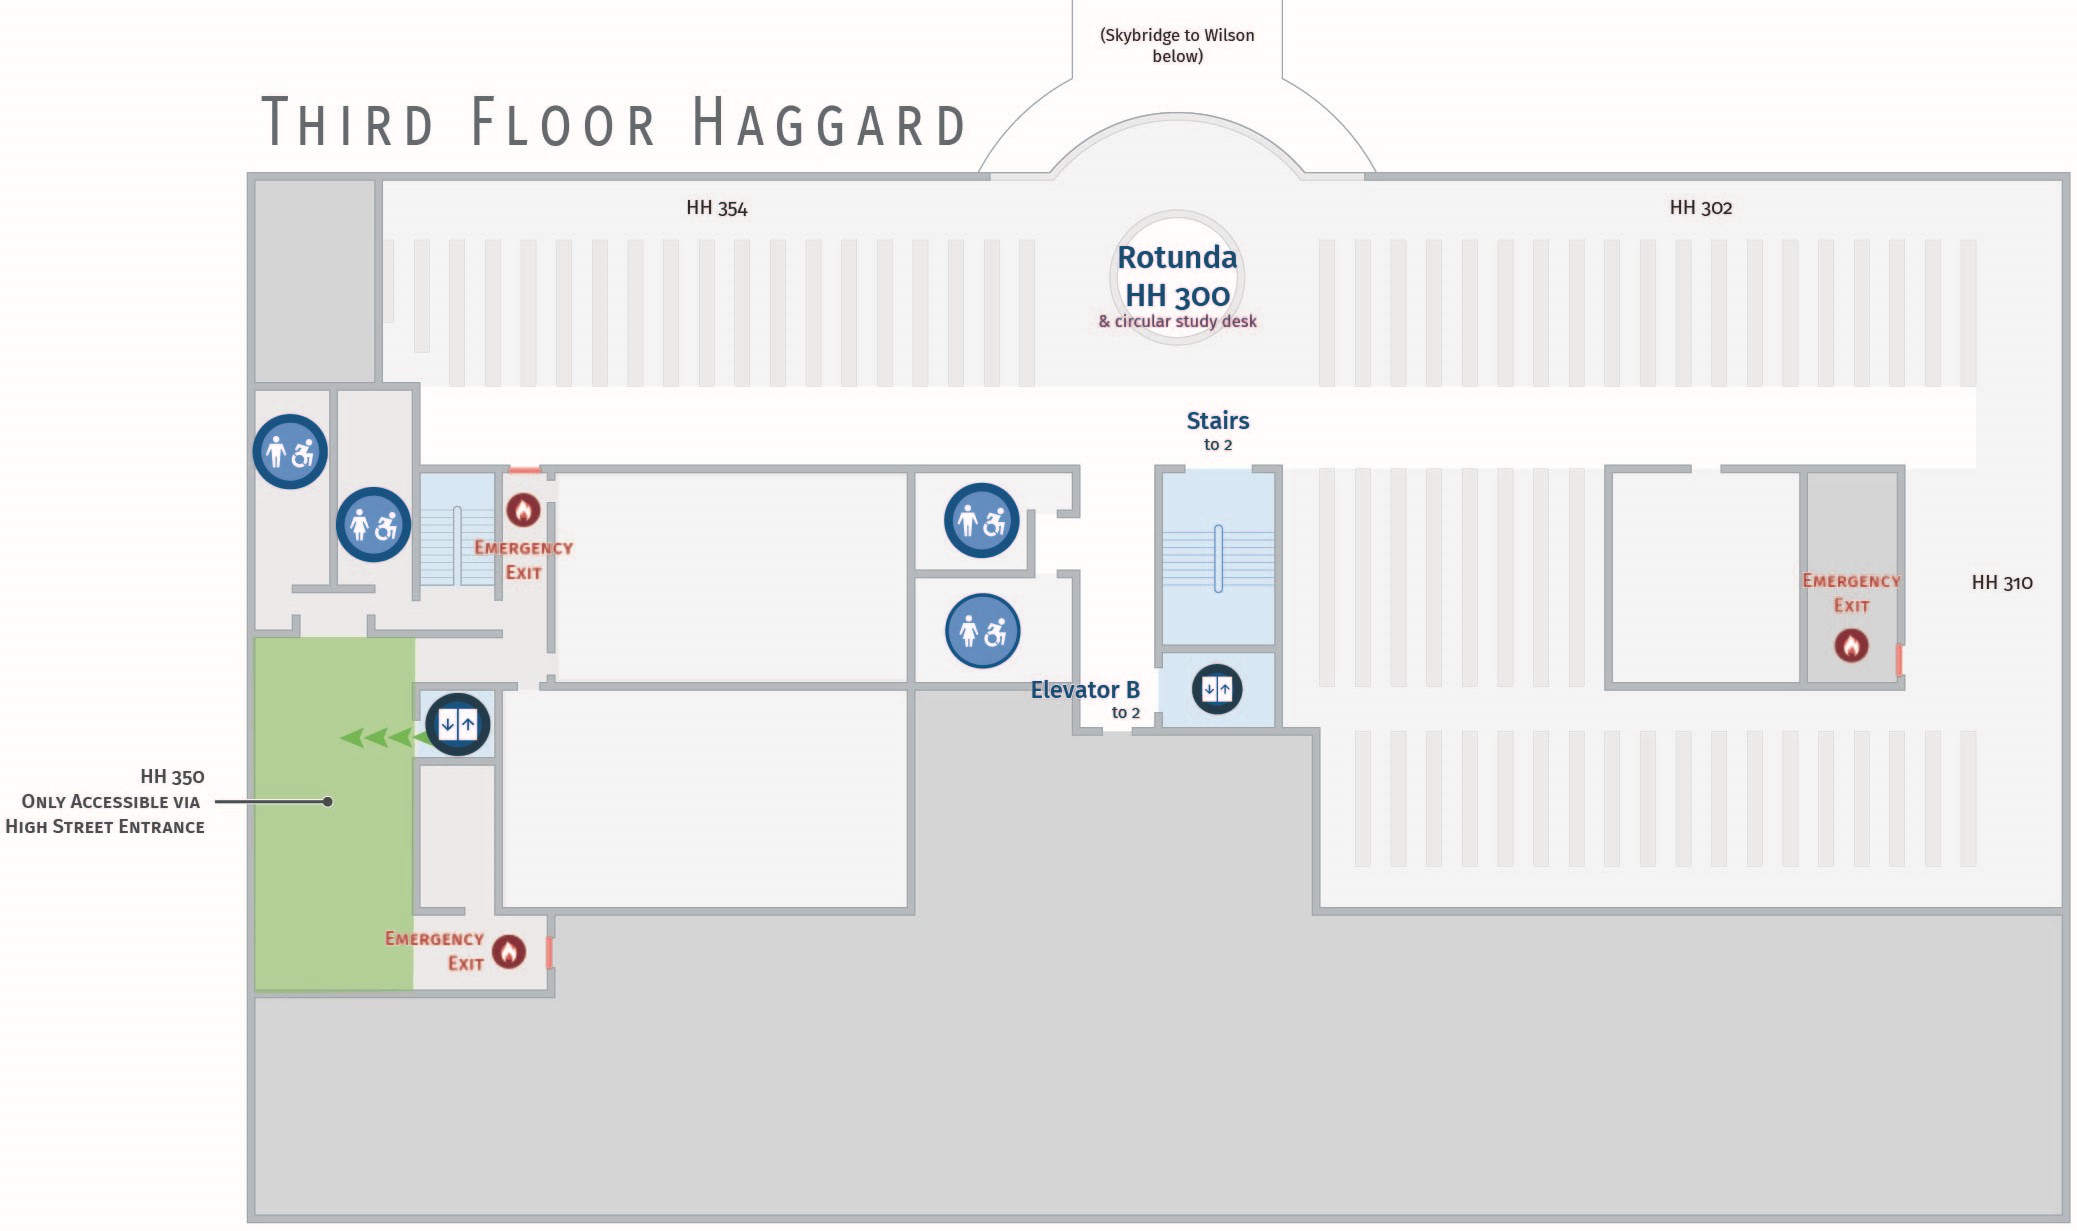 Floor plan, third floor of Haggard with accessible path to HH 350.